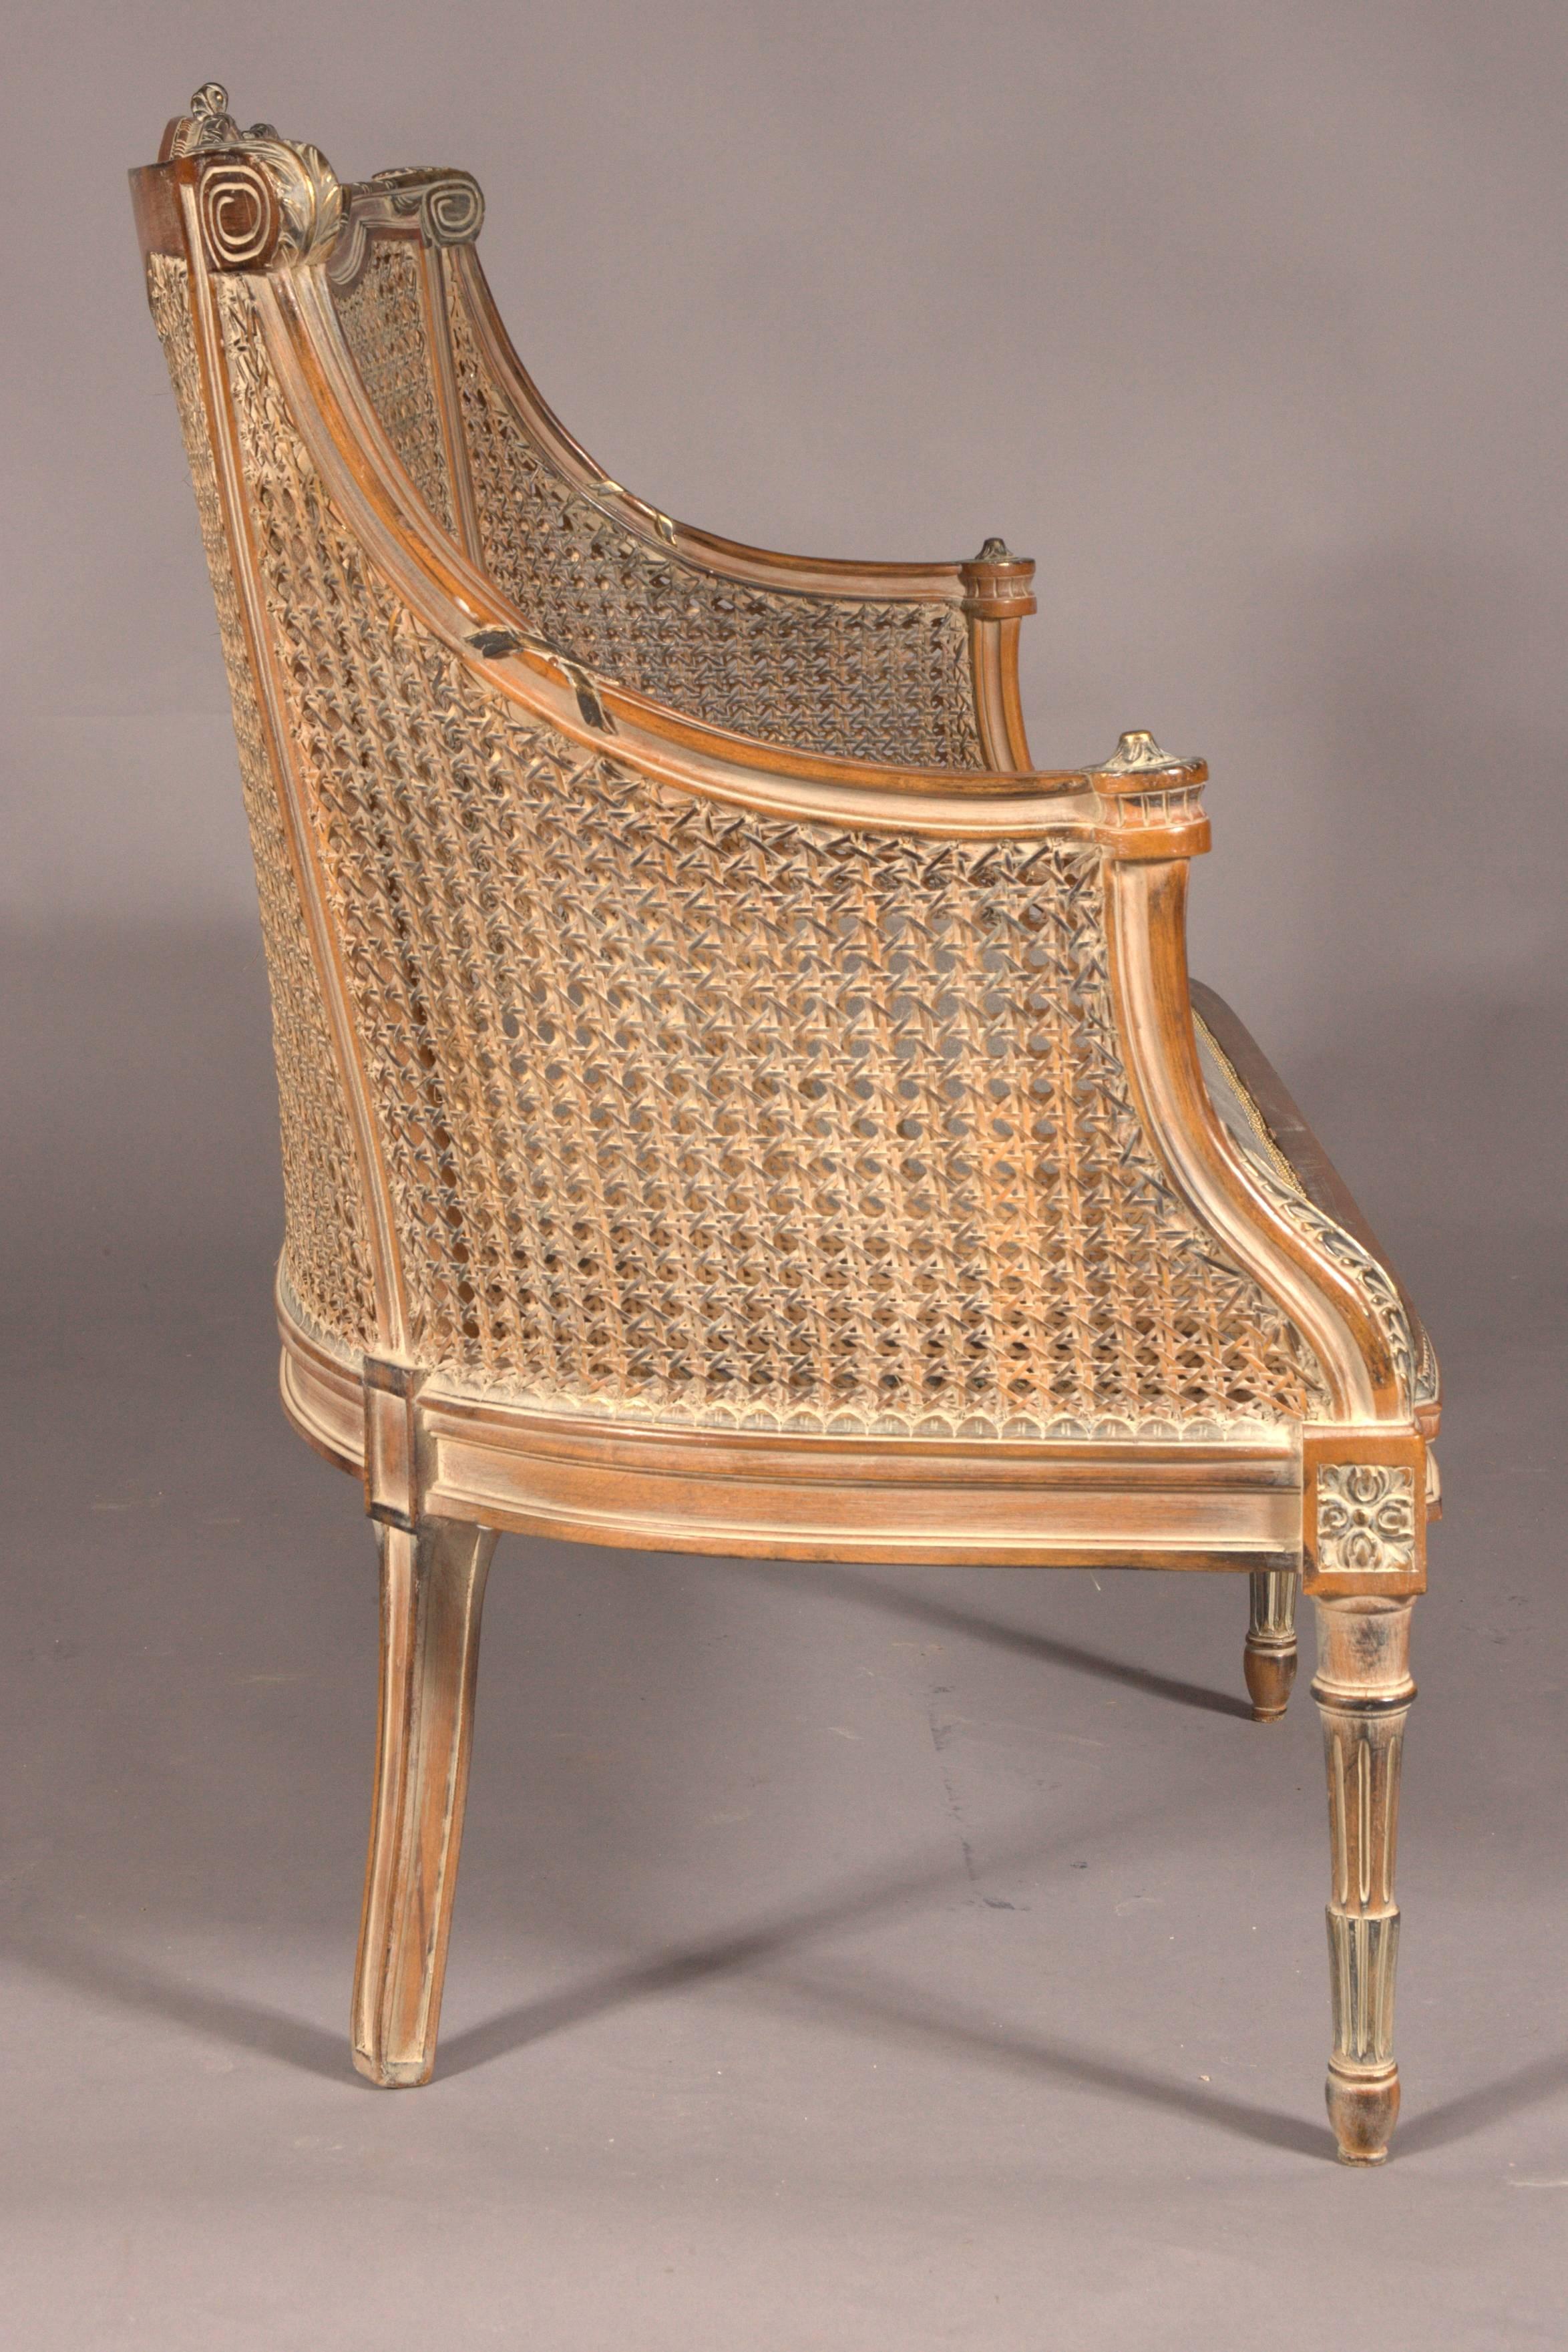 20th Century Elegant Chair Set in English Style, Carved and Colored Beechwood 1